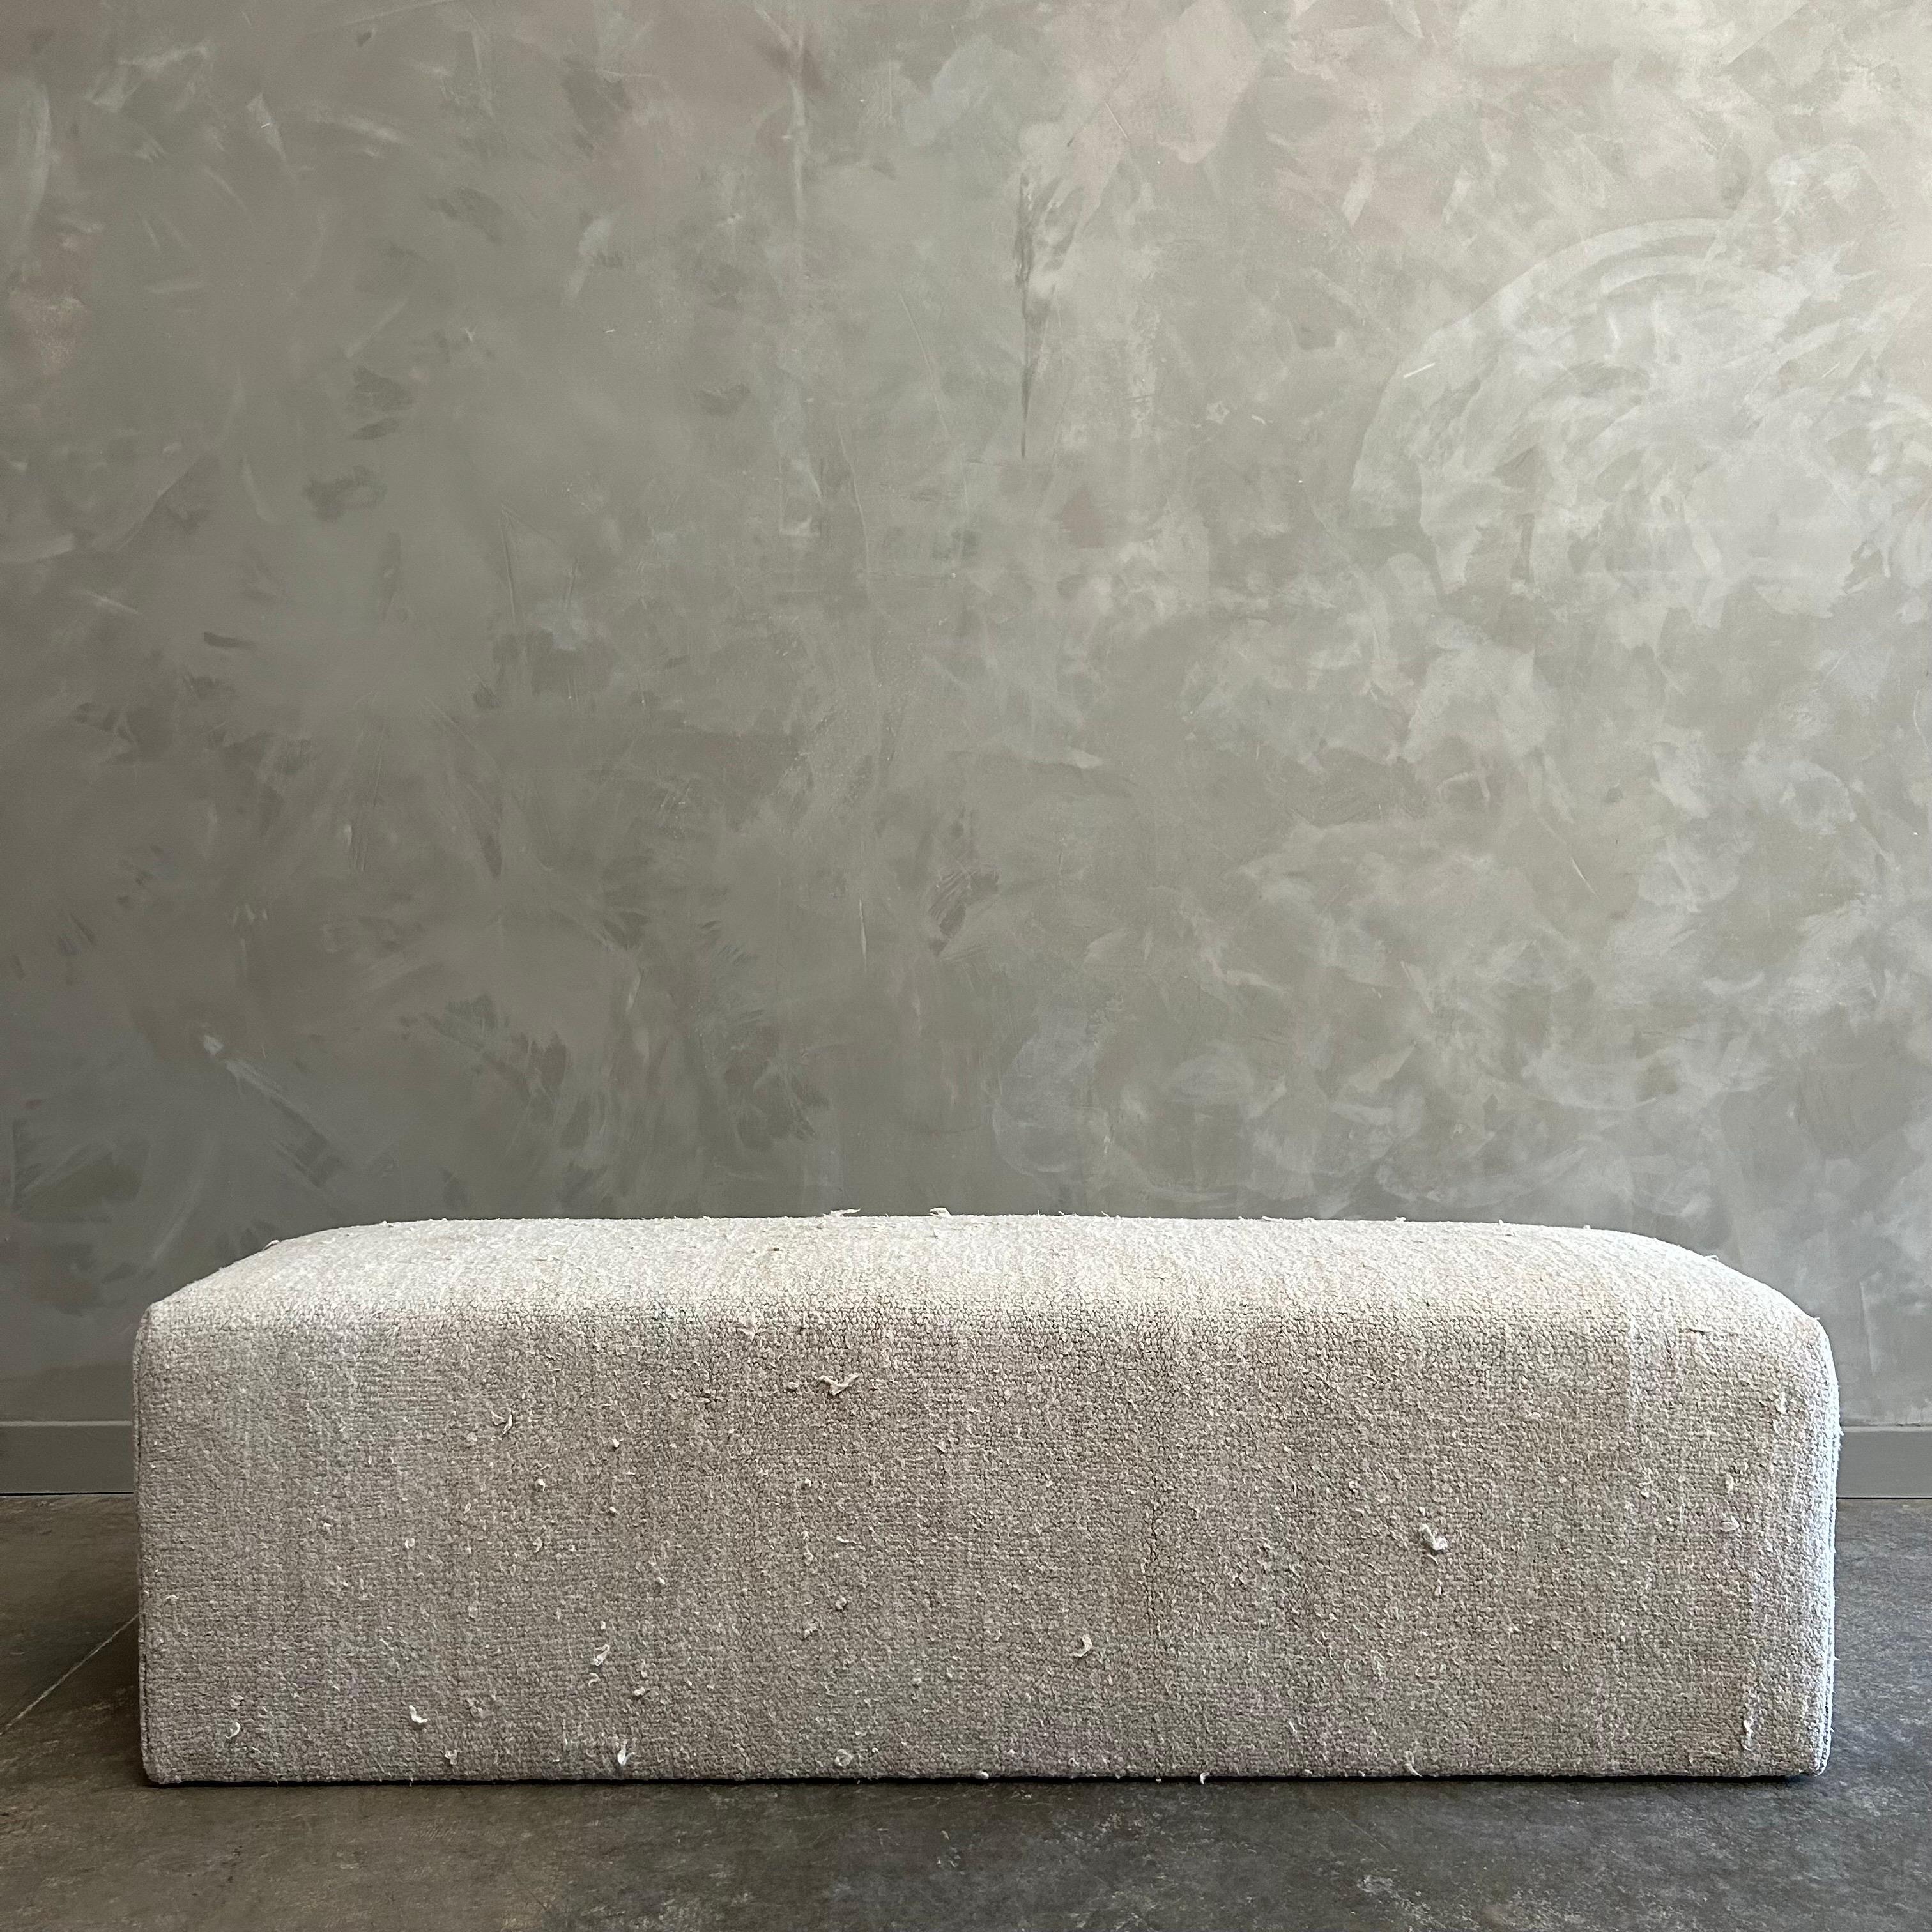 Welcome to bloomhomeinc we stock over 2000 items, please scroll down and click view sellers other items to see more!

Custom made from a vintage turkish white hemp rug.  We have customized this bench ottoman to fit at the foot of a king bed, or use